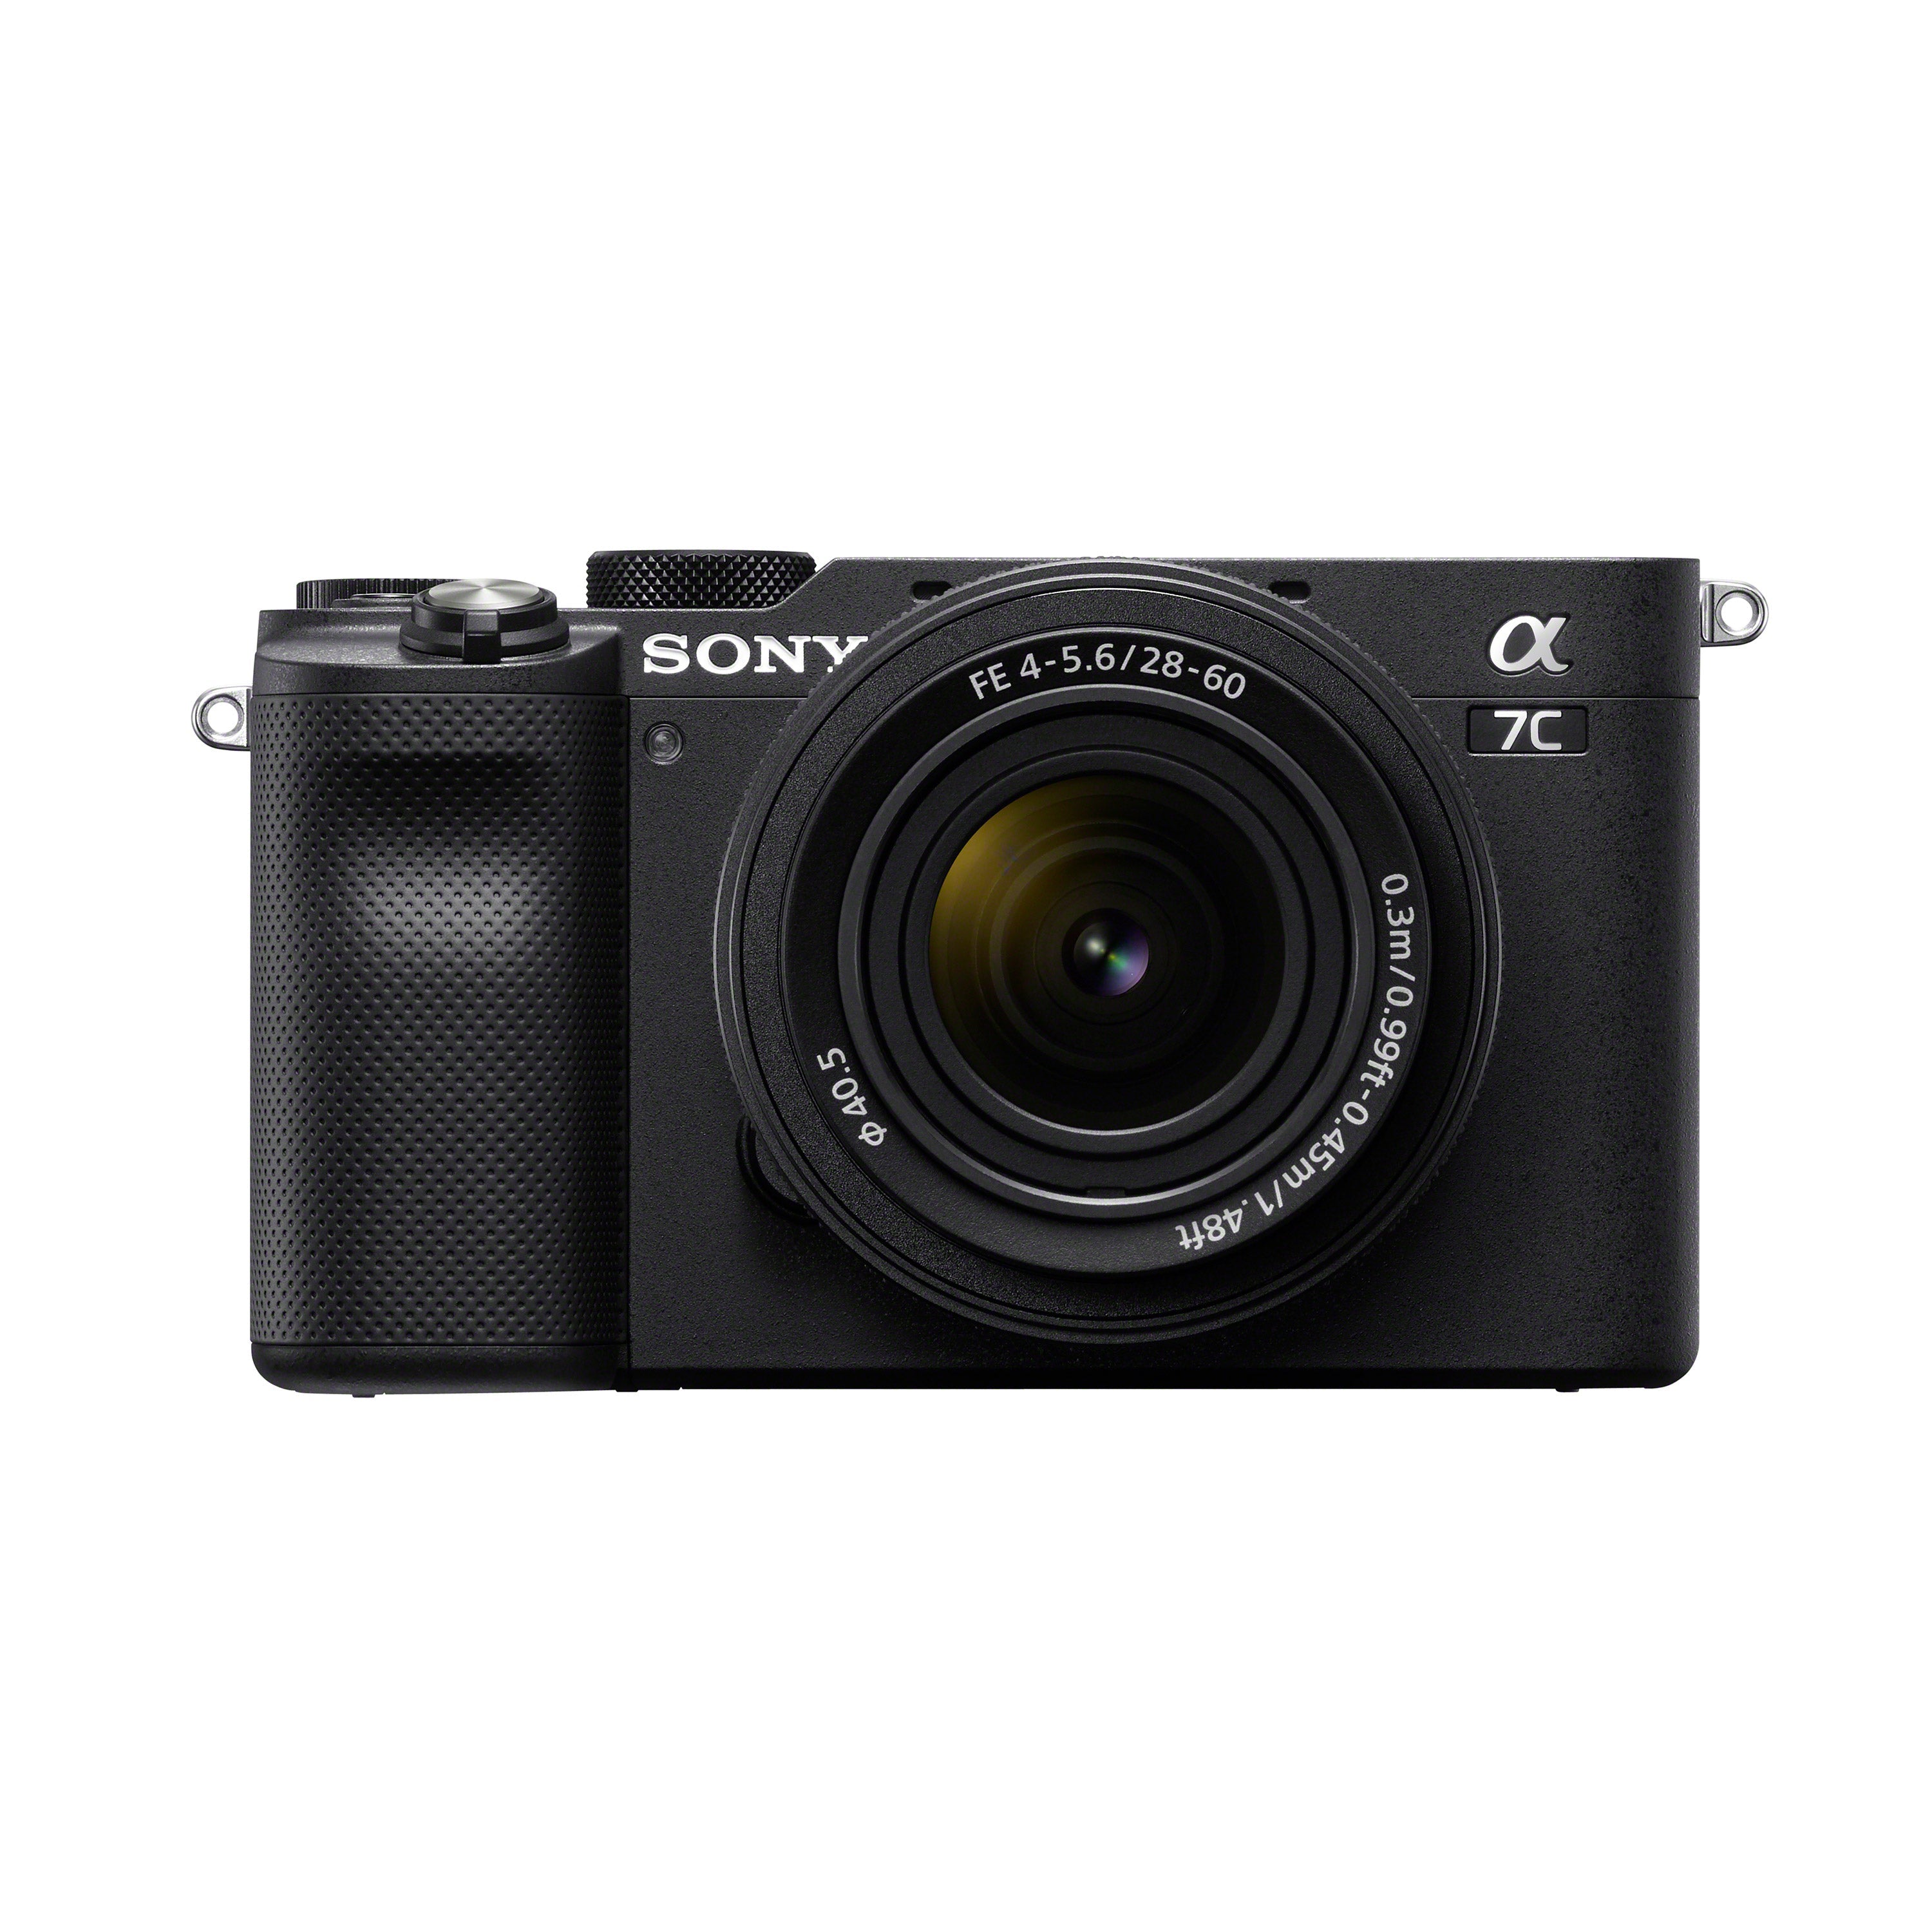 Sony a7C Compact full-frame camera with 28-60mm Lens (Black)